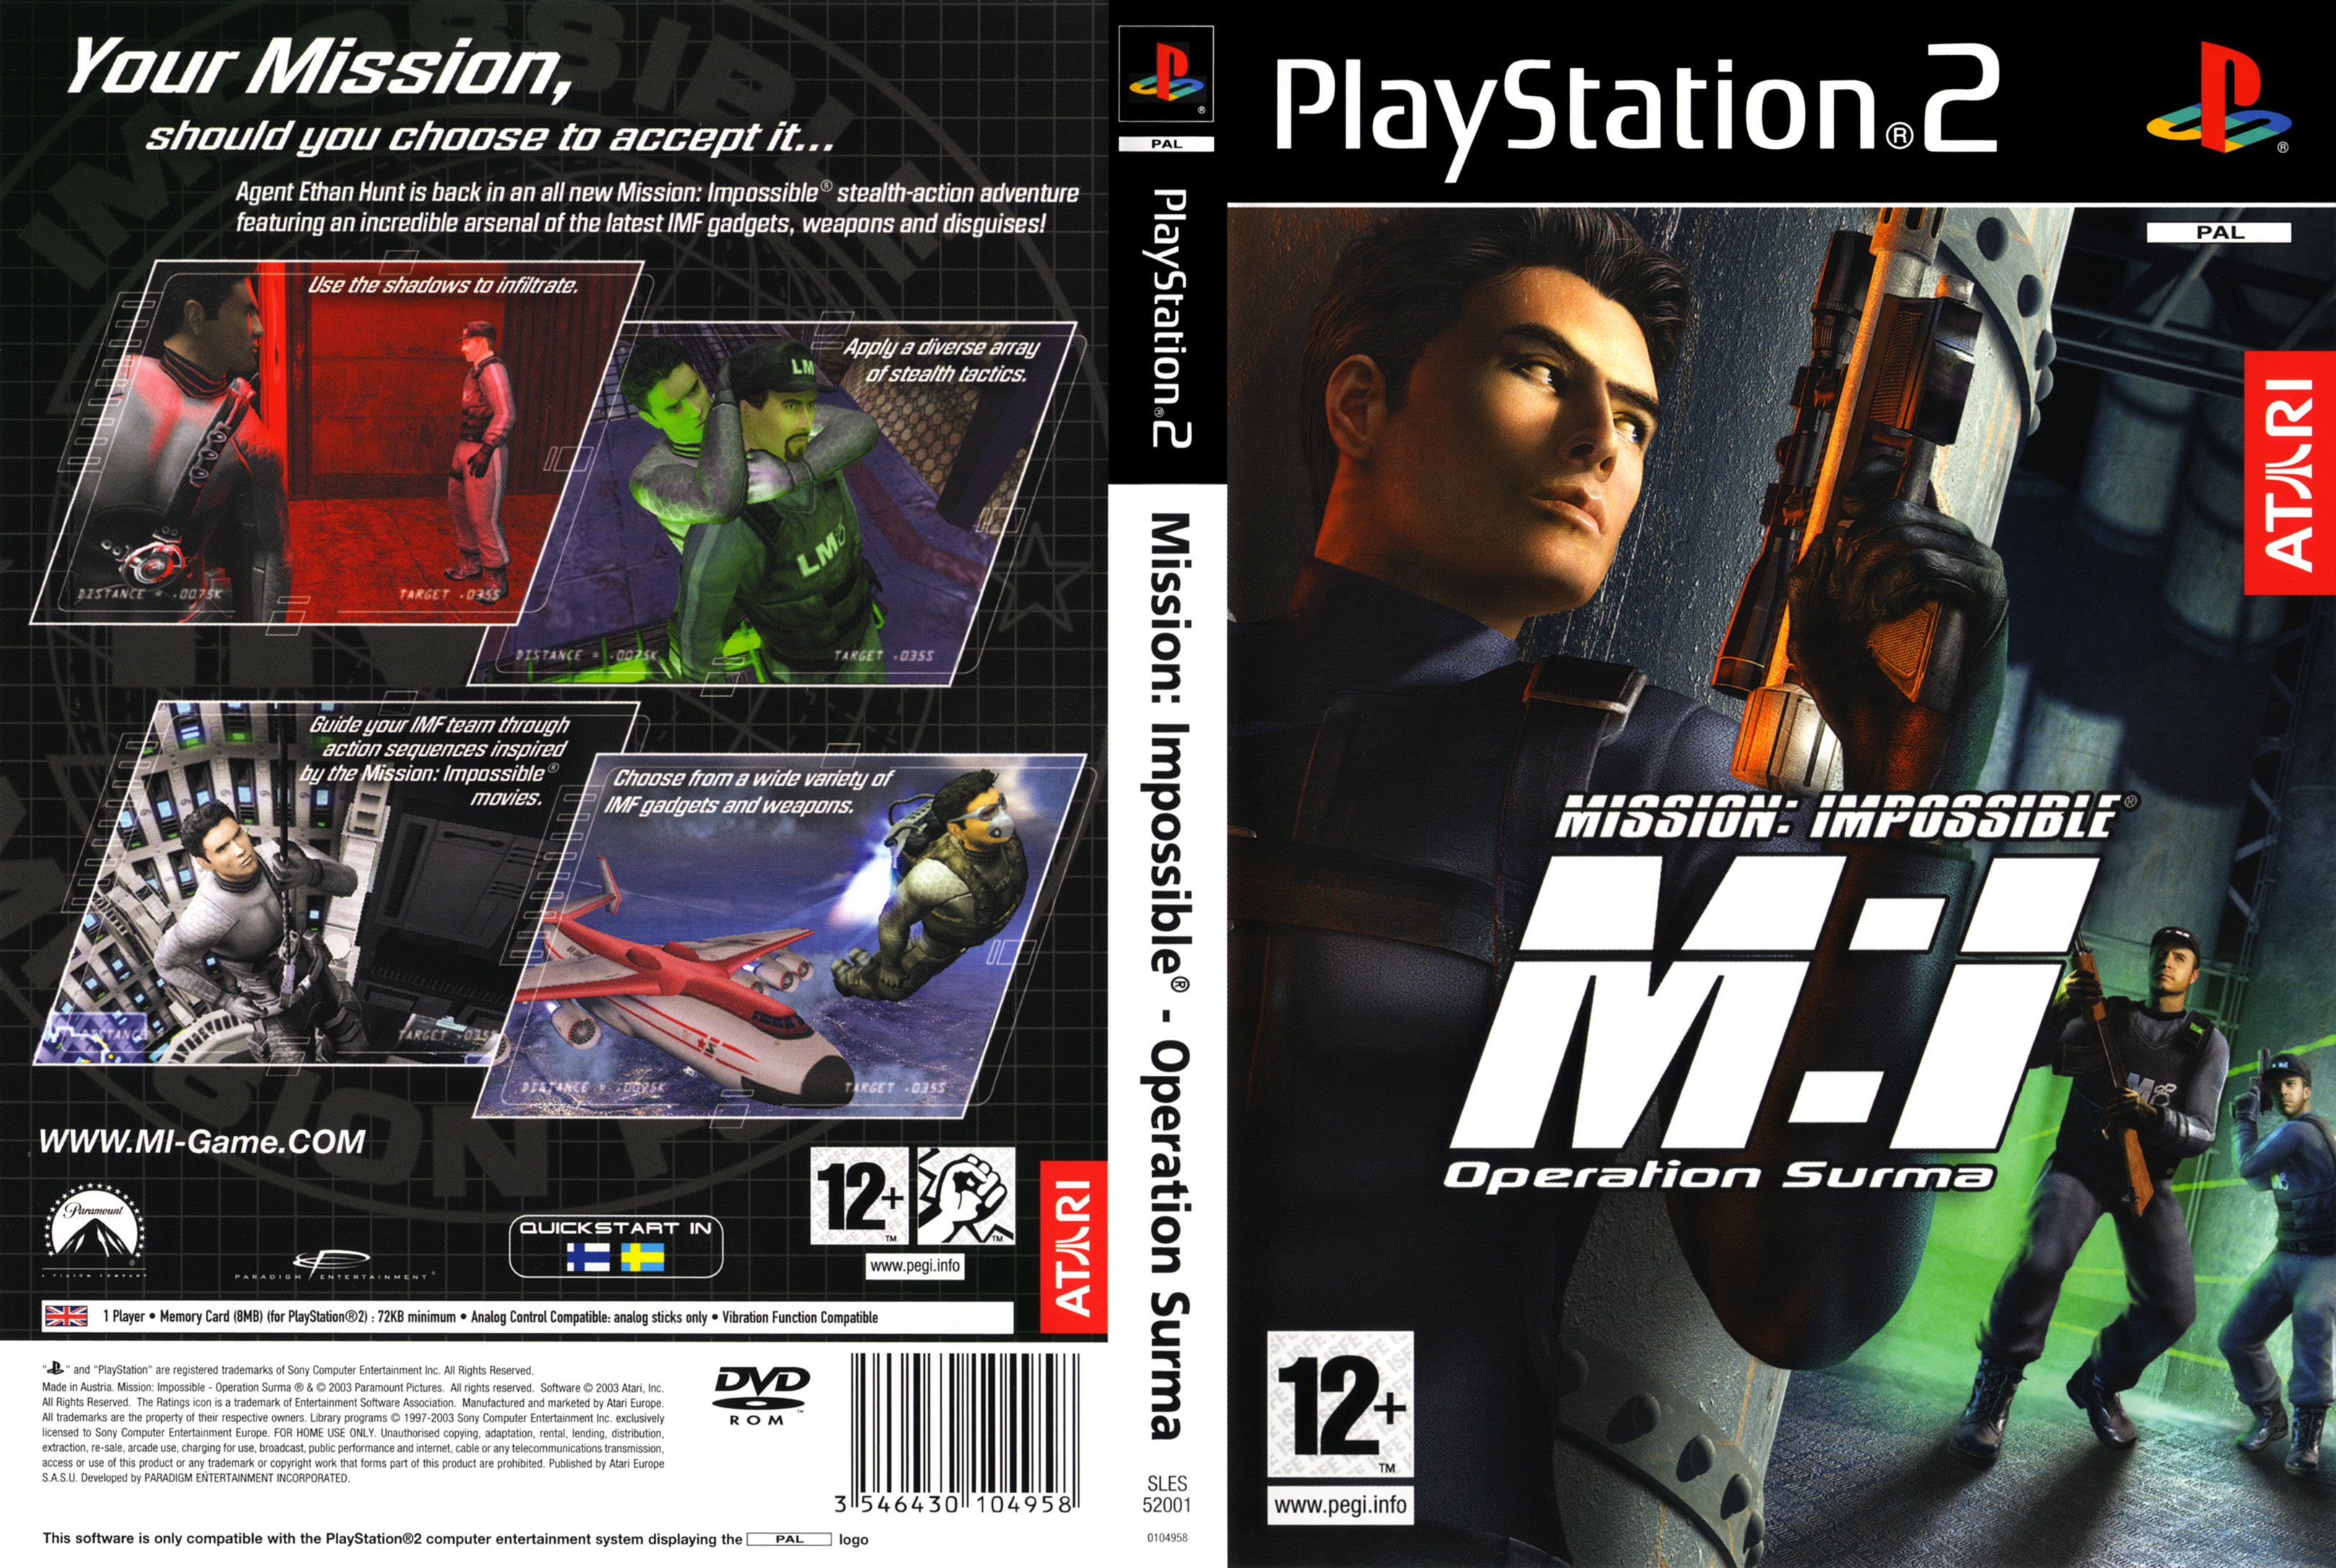 Iso образ игр ps2. Mission Impossible игра PLAYSTATION. Mission Impossible ps2. Mission Impossible Operation Surma игра ps2. Mission: Impossible – Operation Surma.